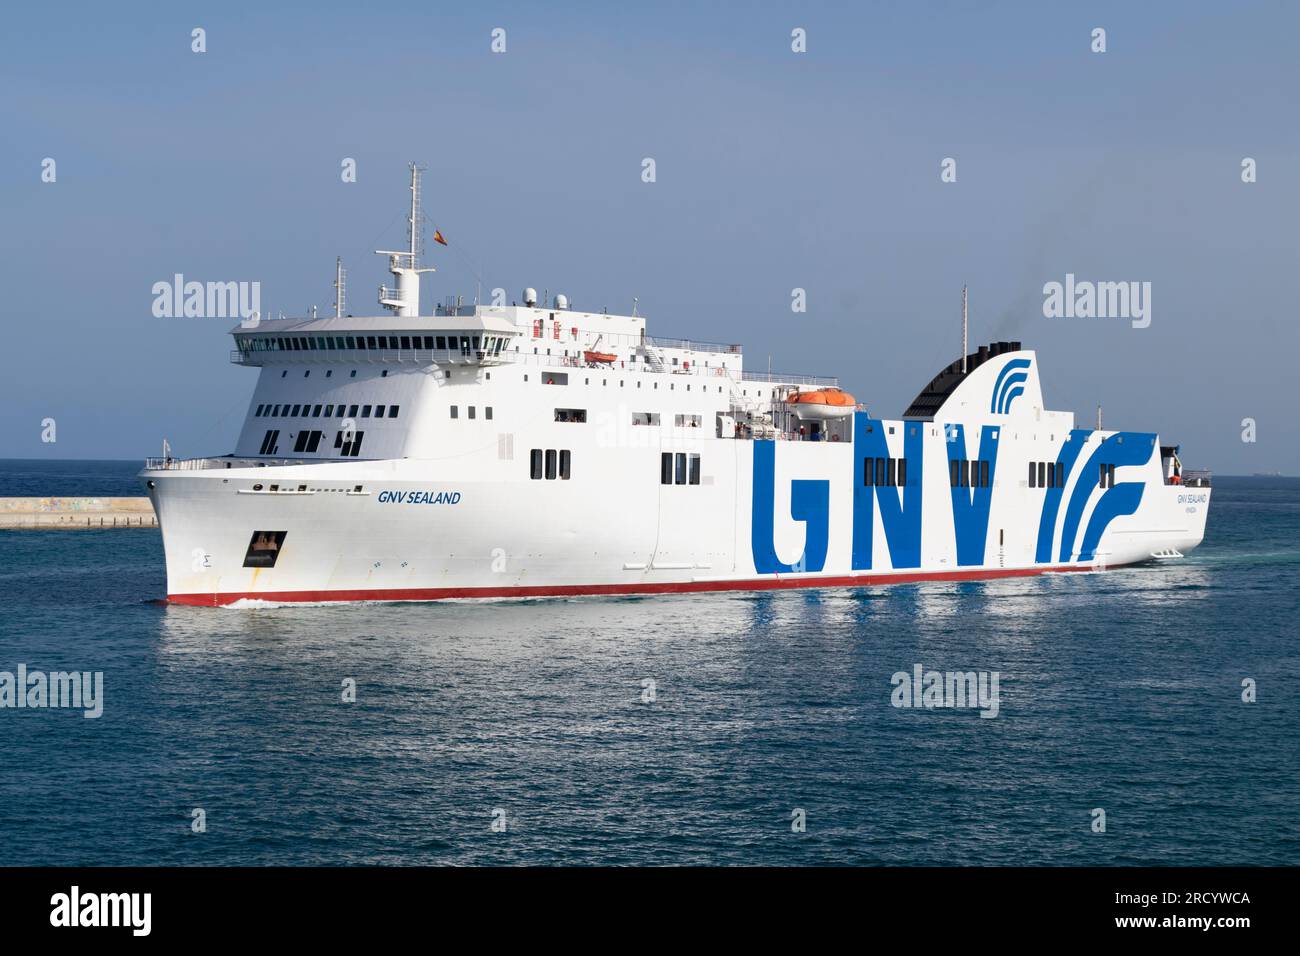 Arrival of the GNV Sealand ferry at the port of Barcelona. July 16 ...